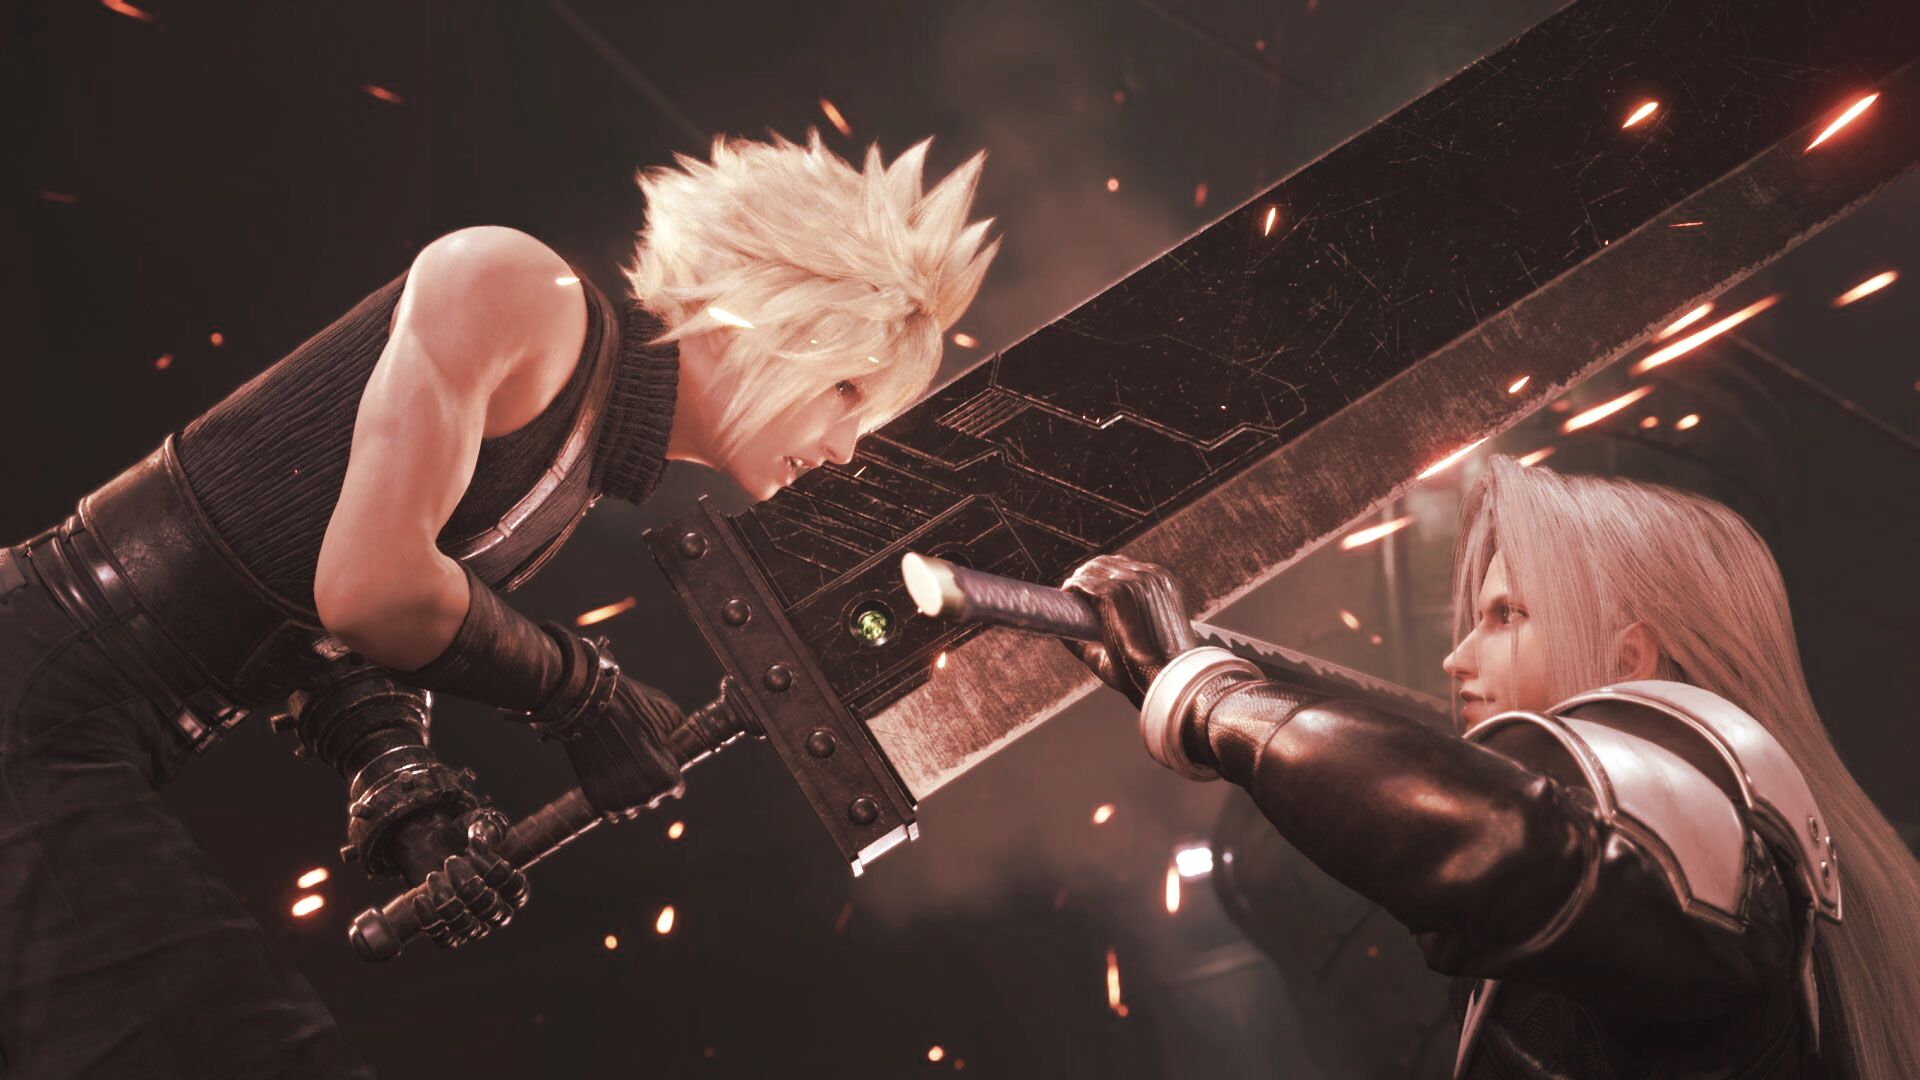 Square Enix is the publisher of the smash hit Final Fantasy series. Image: Square Enix